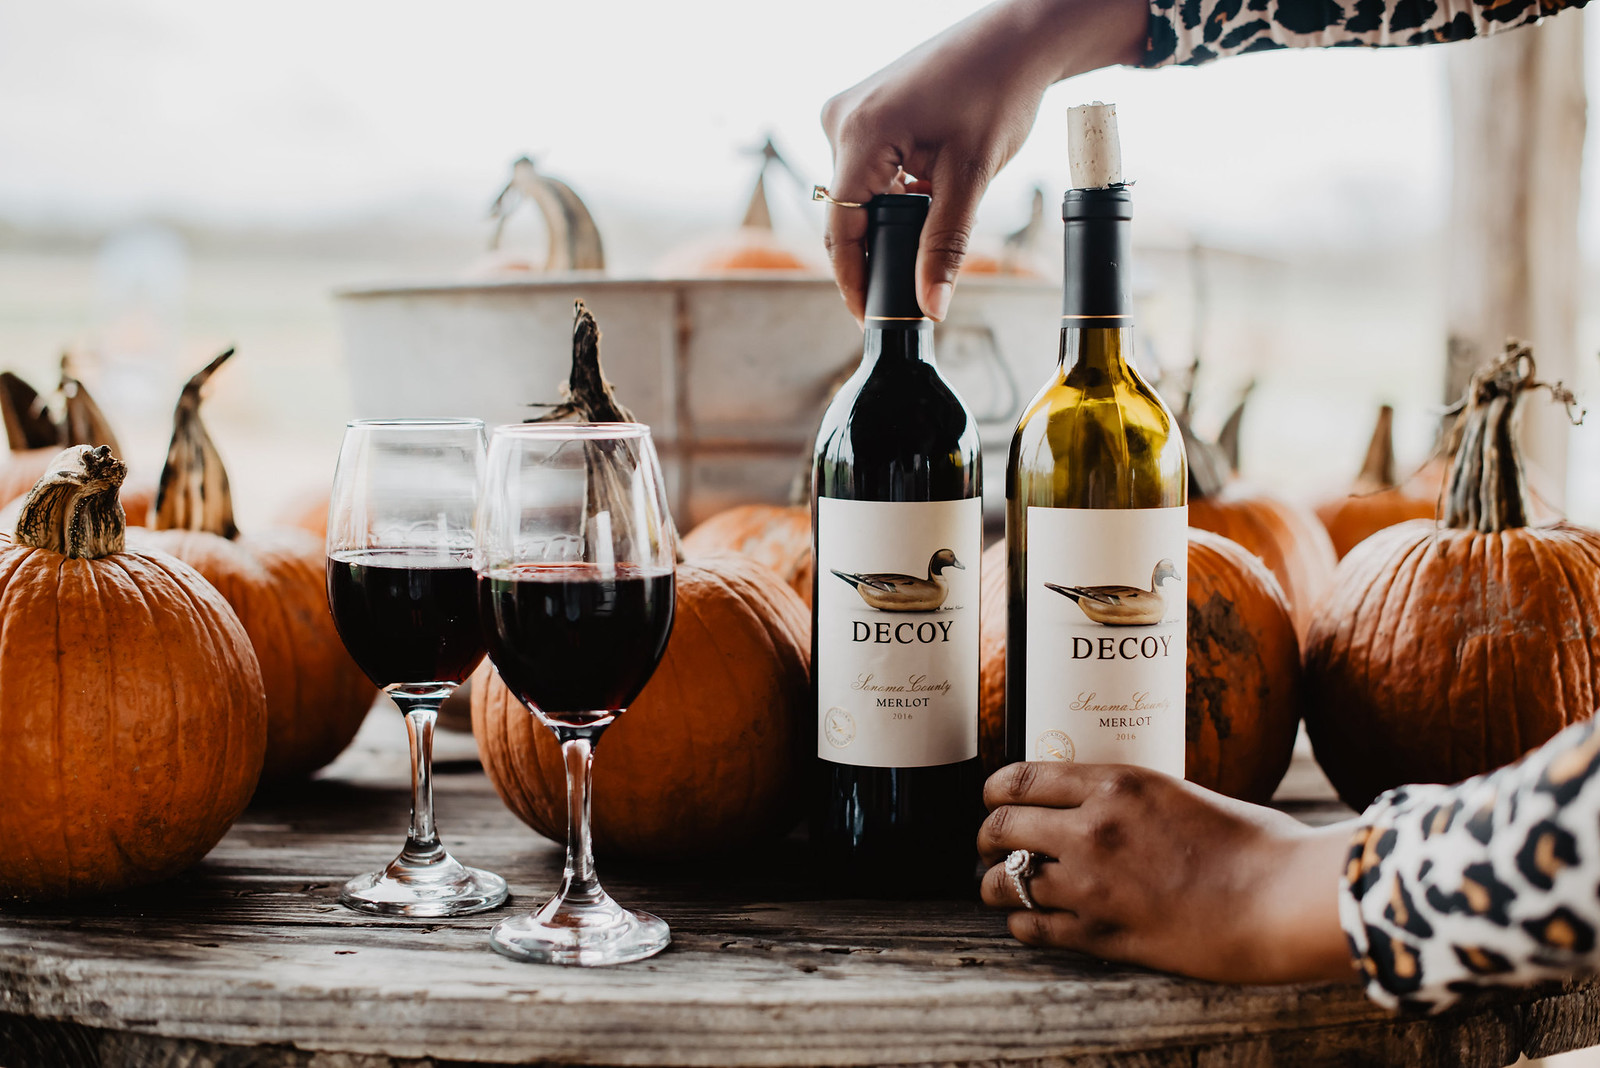 Share Your Merlot Experience with decoy merlot